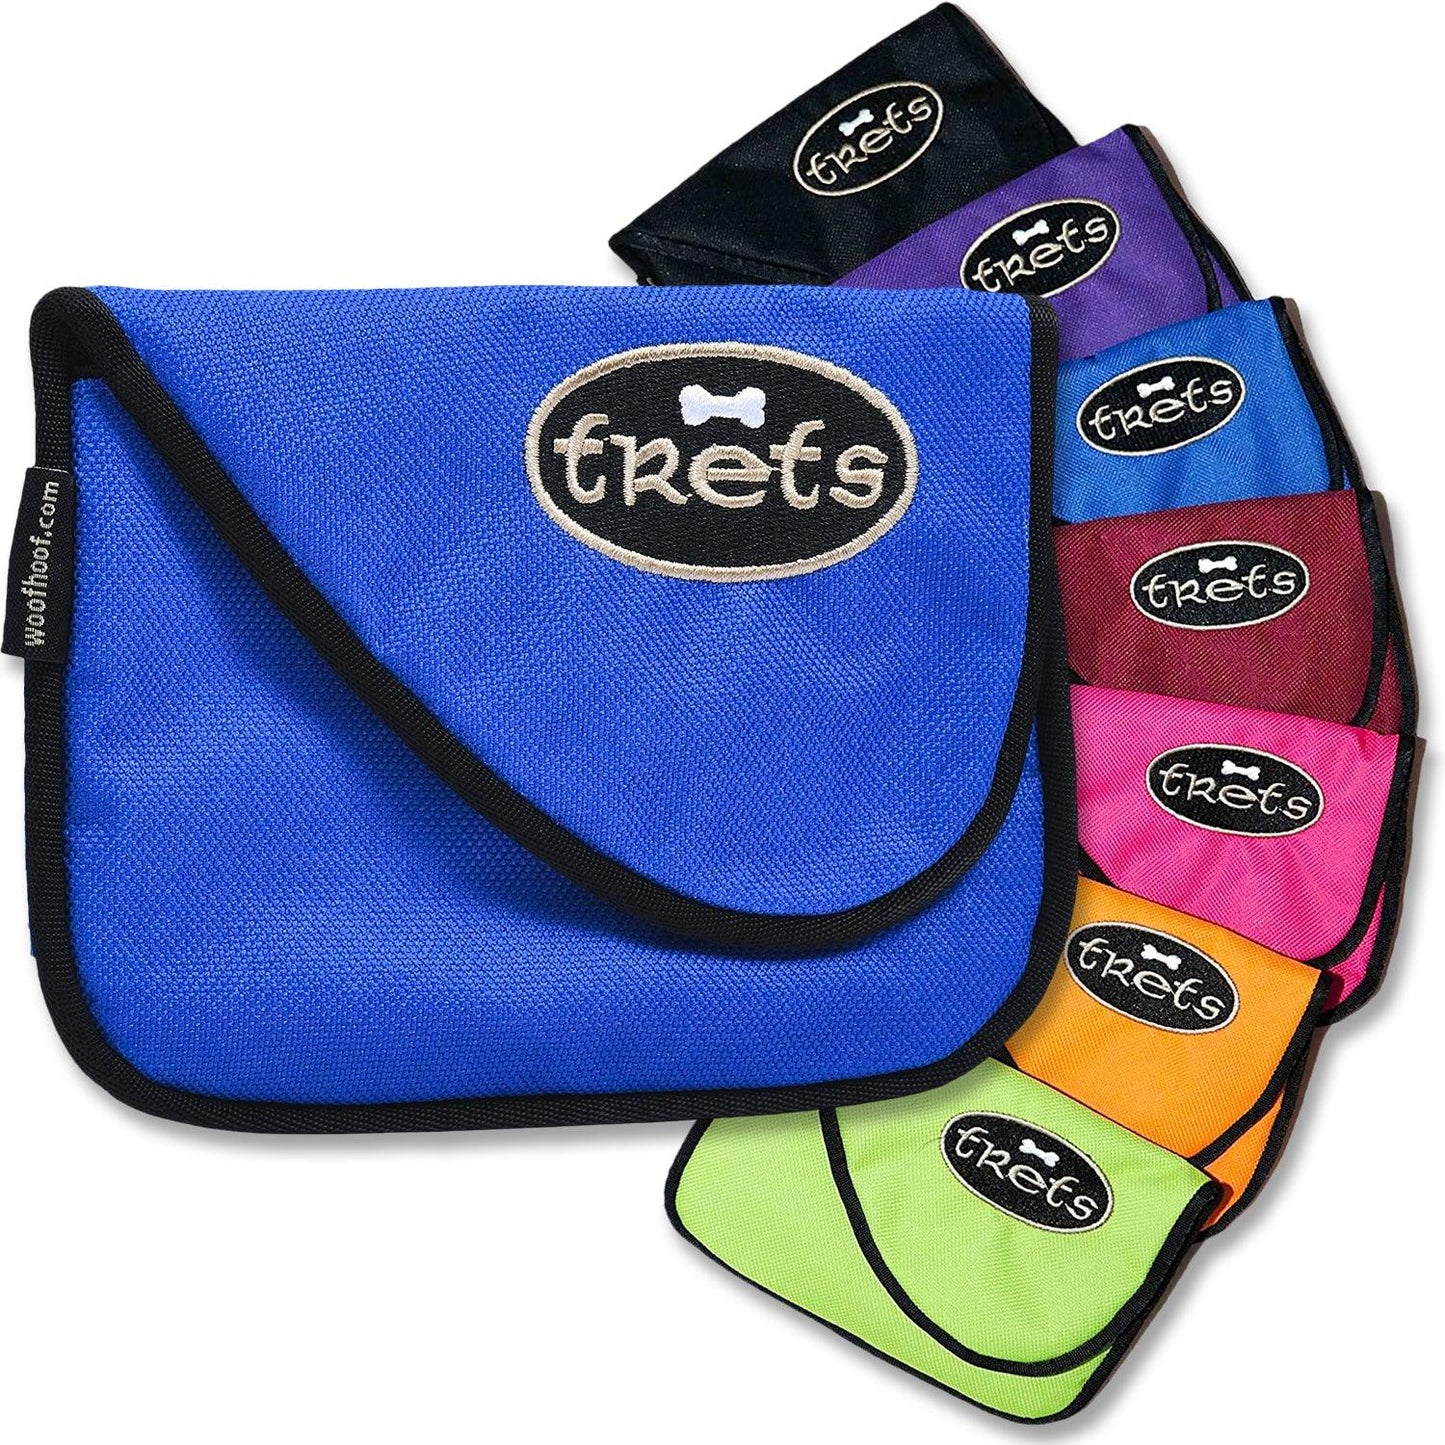 Blue bag for dog treats shown with multiple color options